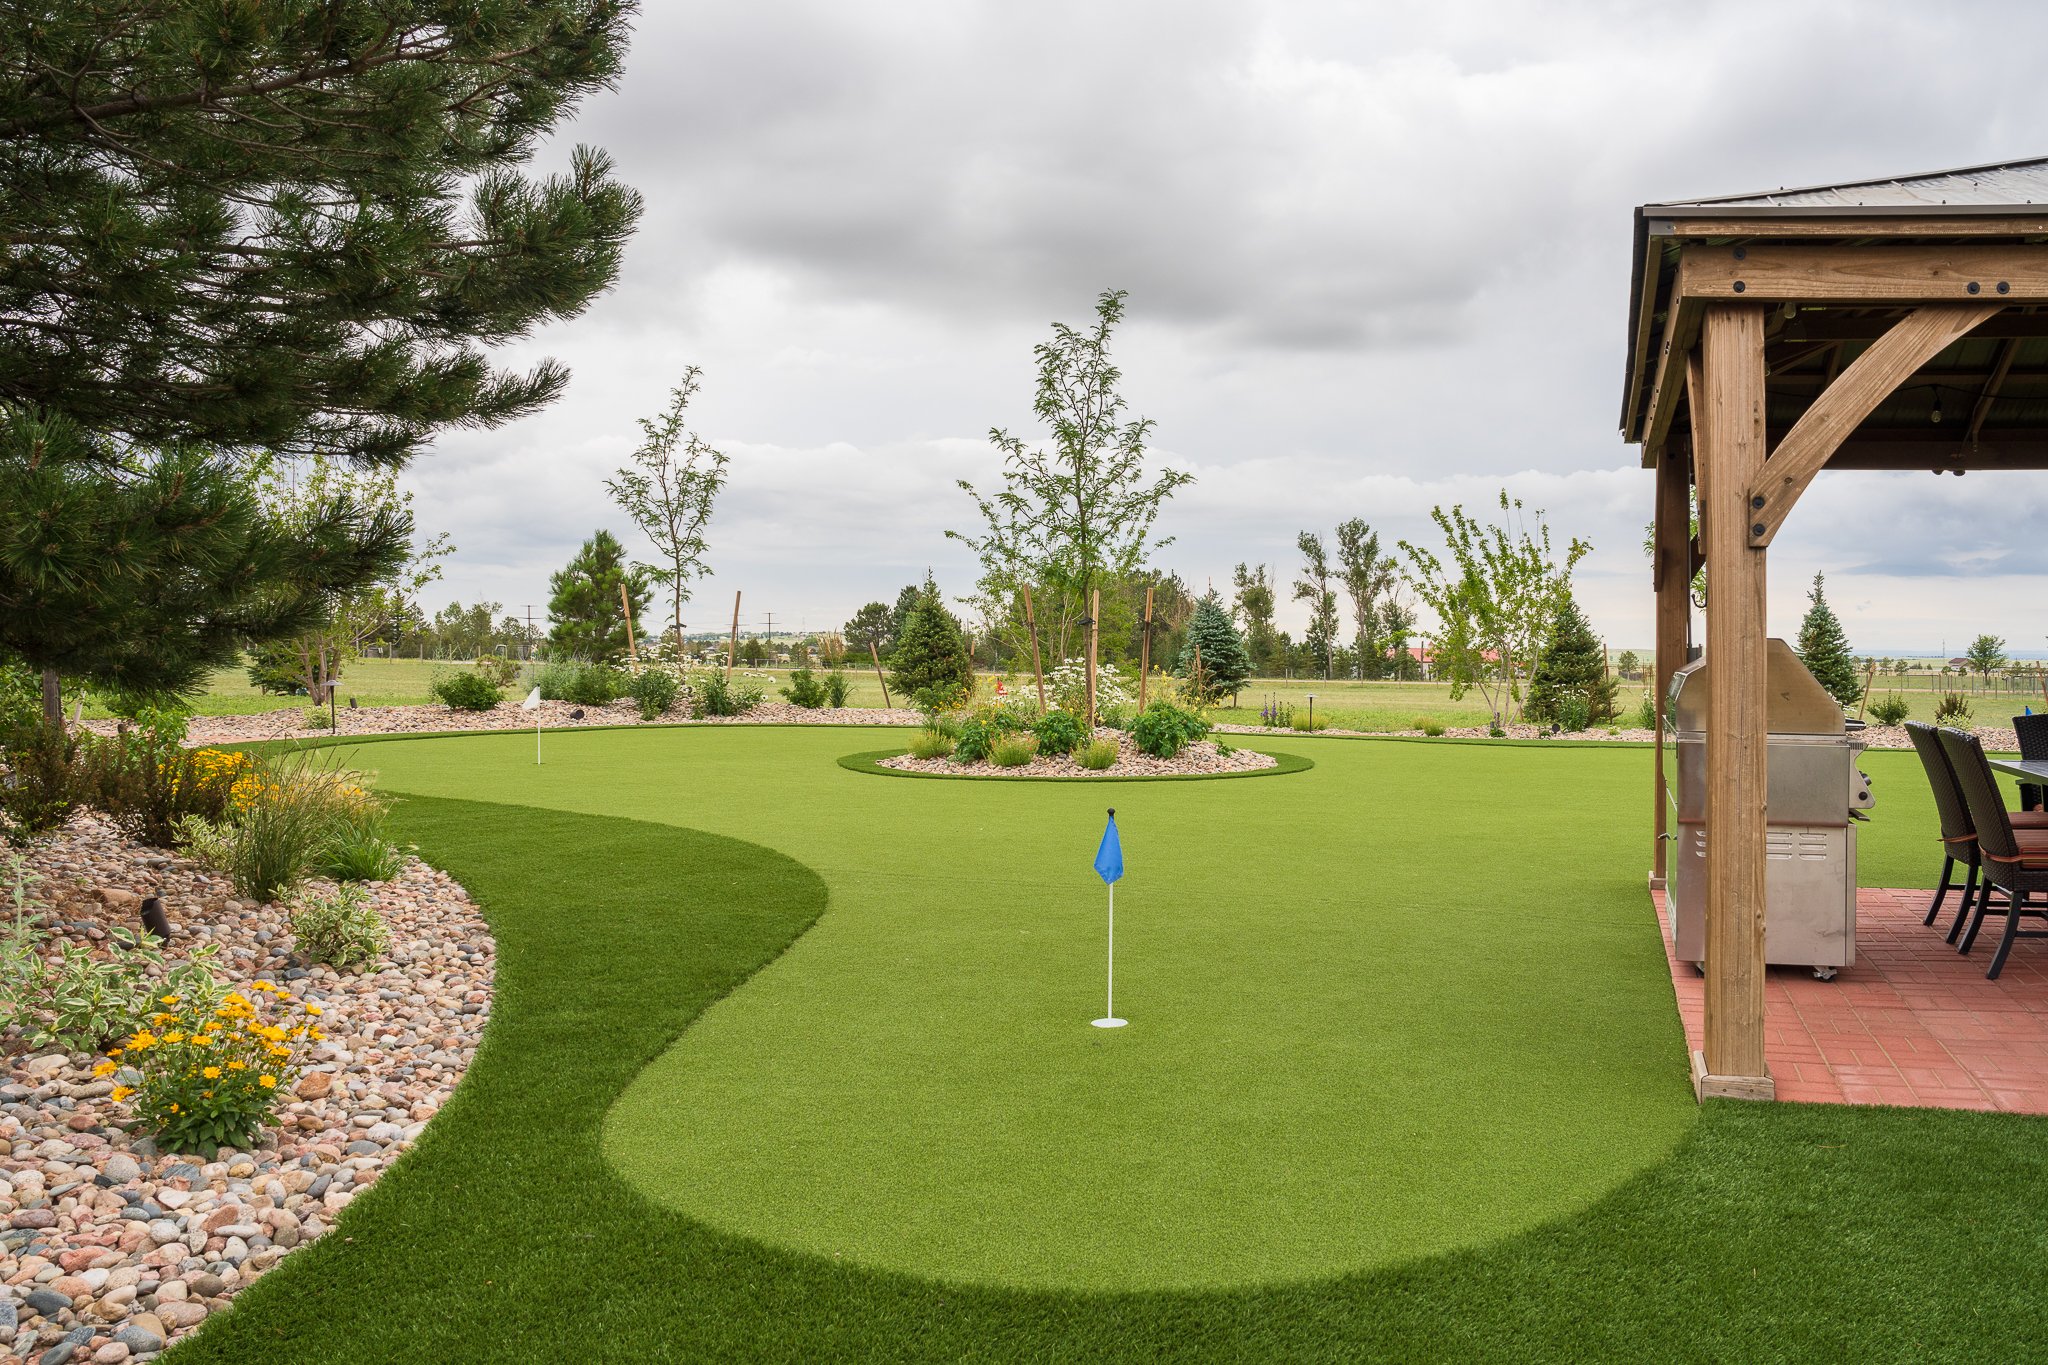 Landscape design with golf course and artificial turf in Gleneagle, CO